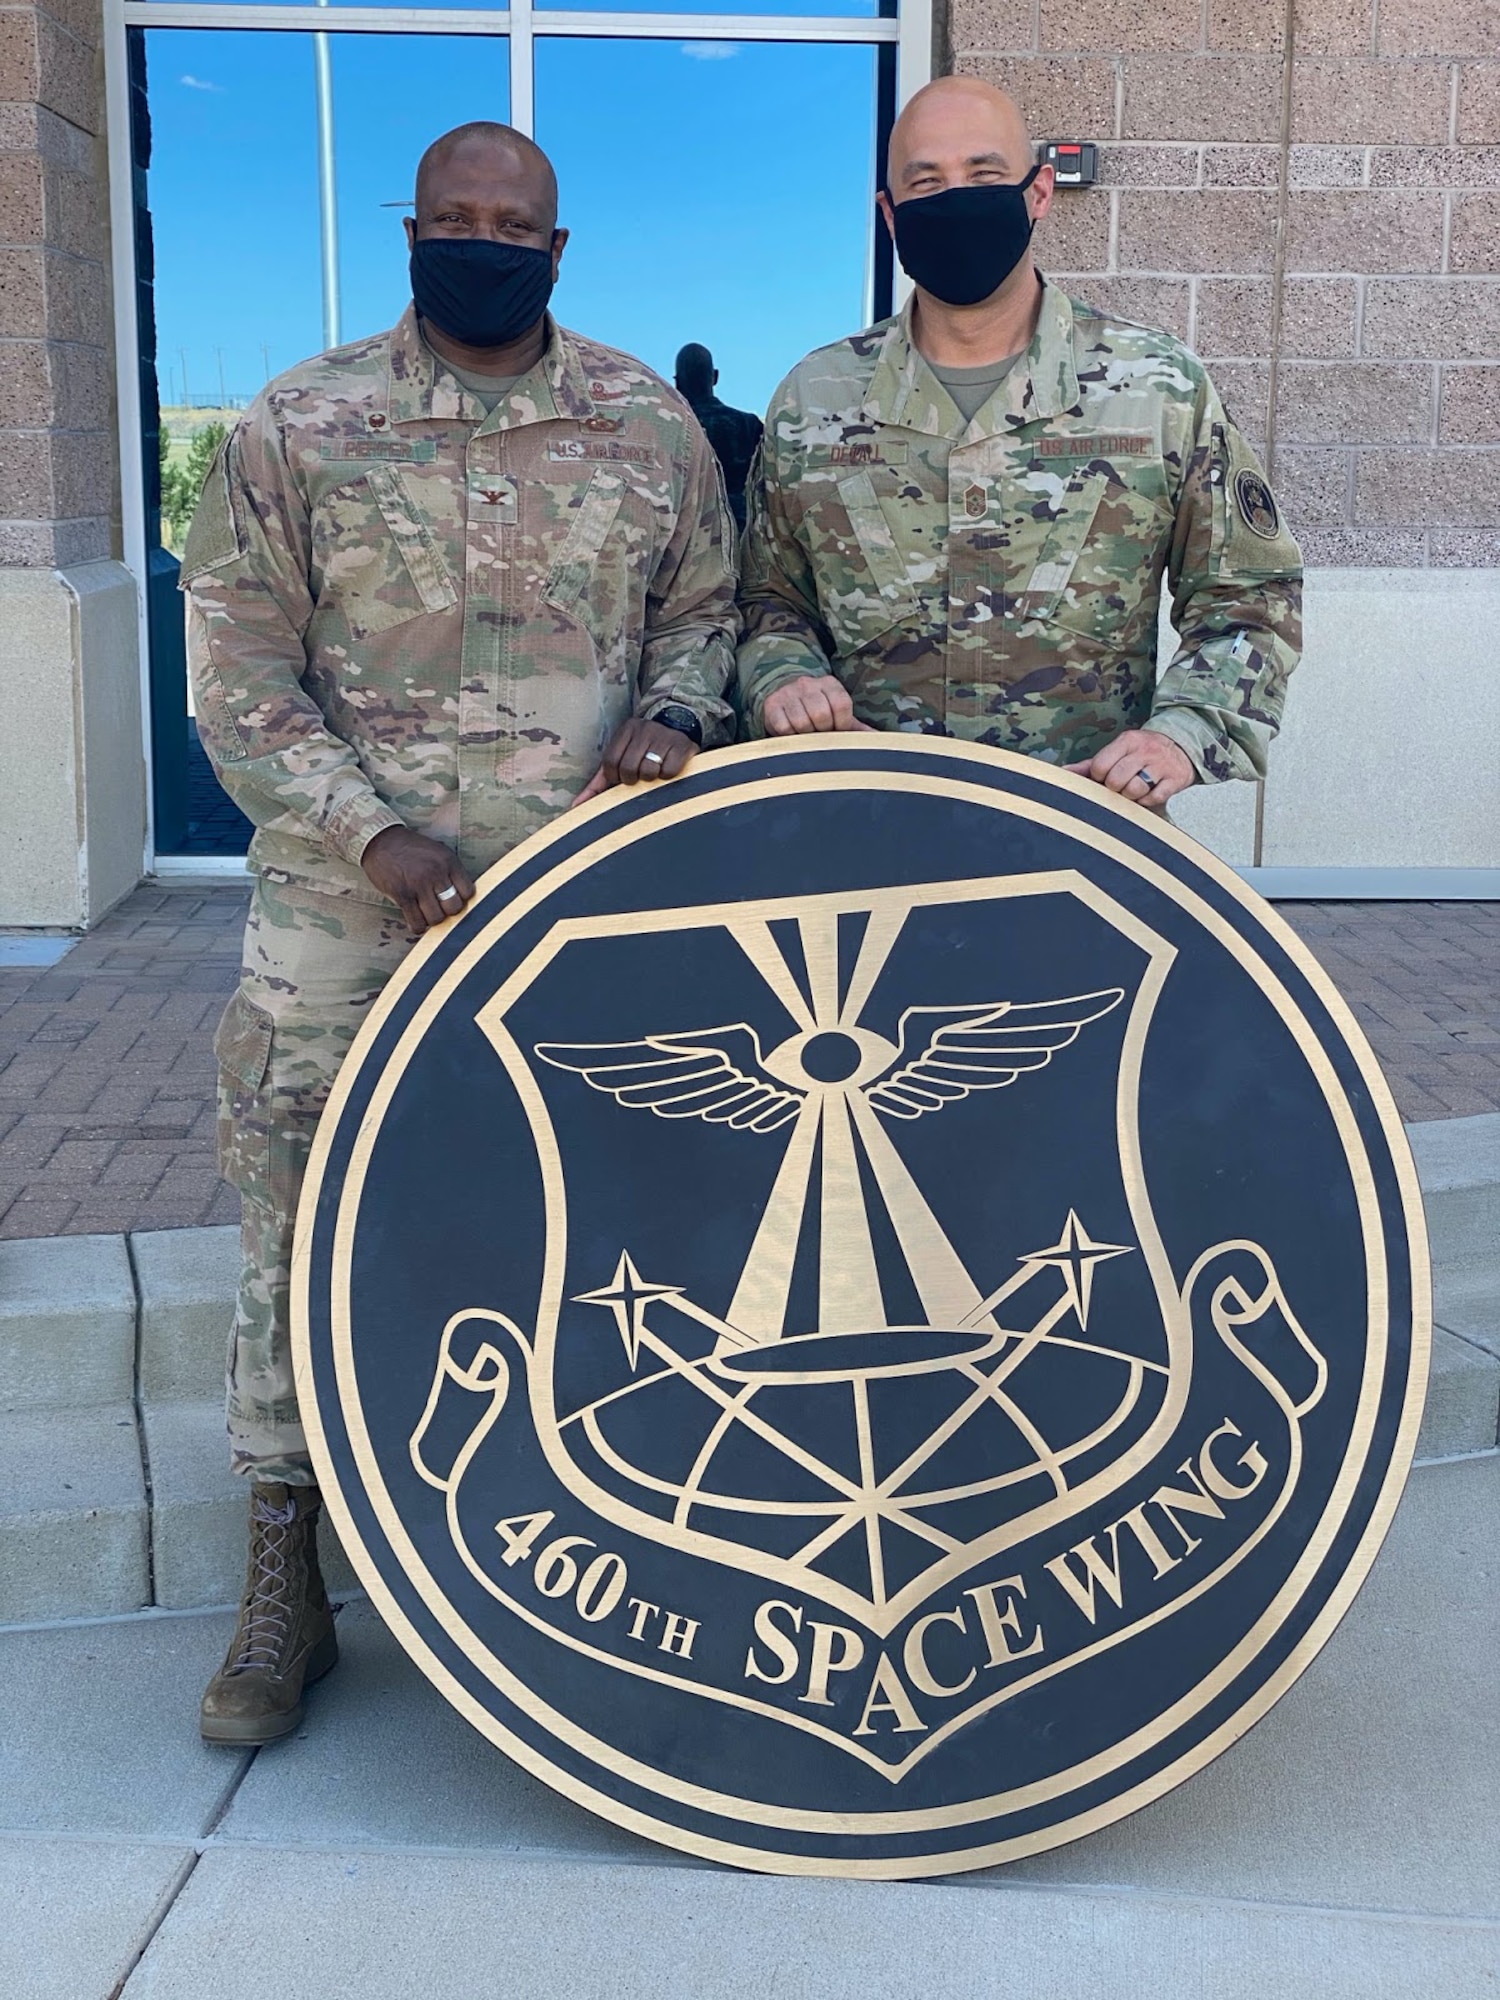 Col. Devin Pepper, Buckley Garrison commander, and Chief Master Sgt. Robert Devall, Buckley Garrison command chief, pose for a photo with the 460th Space Wing sign at the Headquarters building on Buckley Air Force Base, Colo., August 7, 2020.  The sign was taken down, along with the other 460th Space Wing signs and shields to mark “the end of an era.” The 460th was deactivated and Buckley Garrison was activated during a virtual ceremony on July 24. (U.S. Air Force photo by Staff Sgt. Jessica Kind)